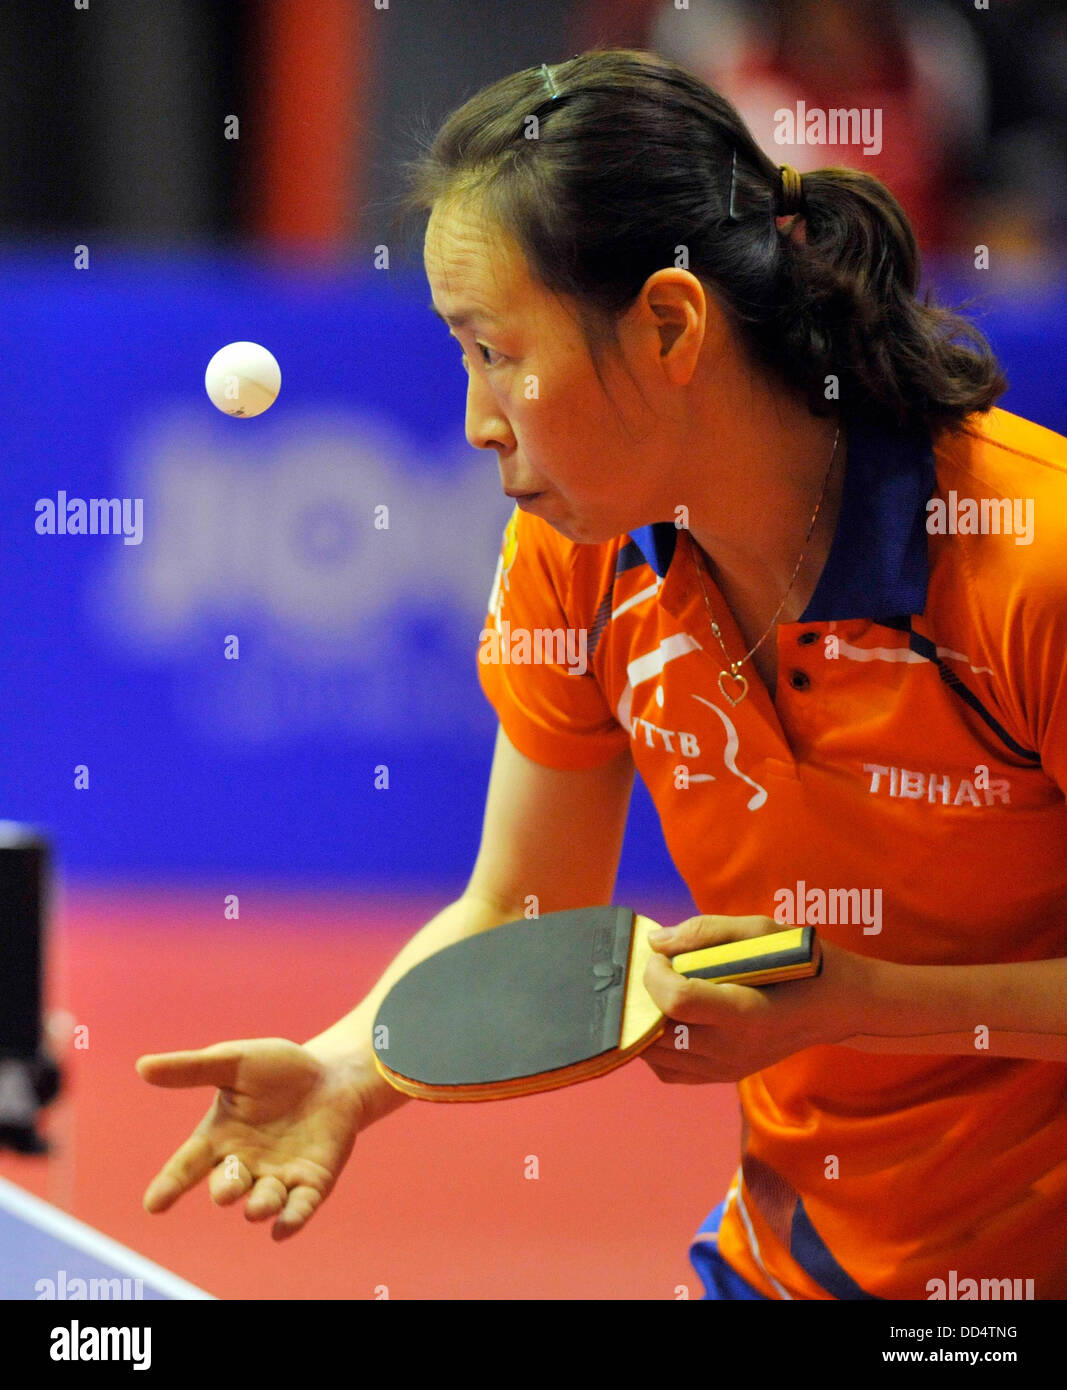 Linda Creemers and Li Jiao (pictured) from Netherlands in action during the finals of women's doubles against Katarzyna Grzybowska and Natalia Partykova of Poland during the World Tour tournament in Olomouc, Czech Republic, August 25, 2013. (CTK Photo/Ludek Perina) Stock Photo